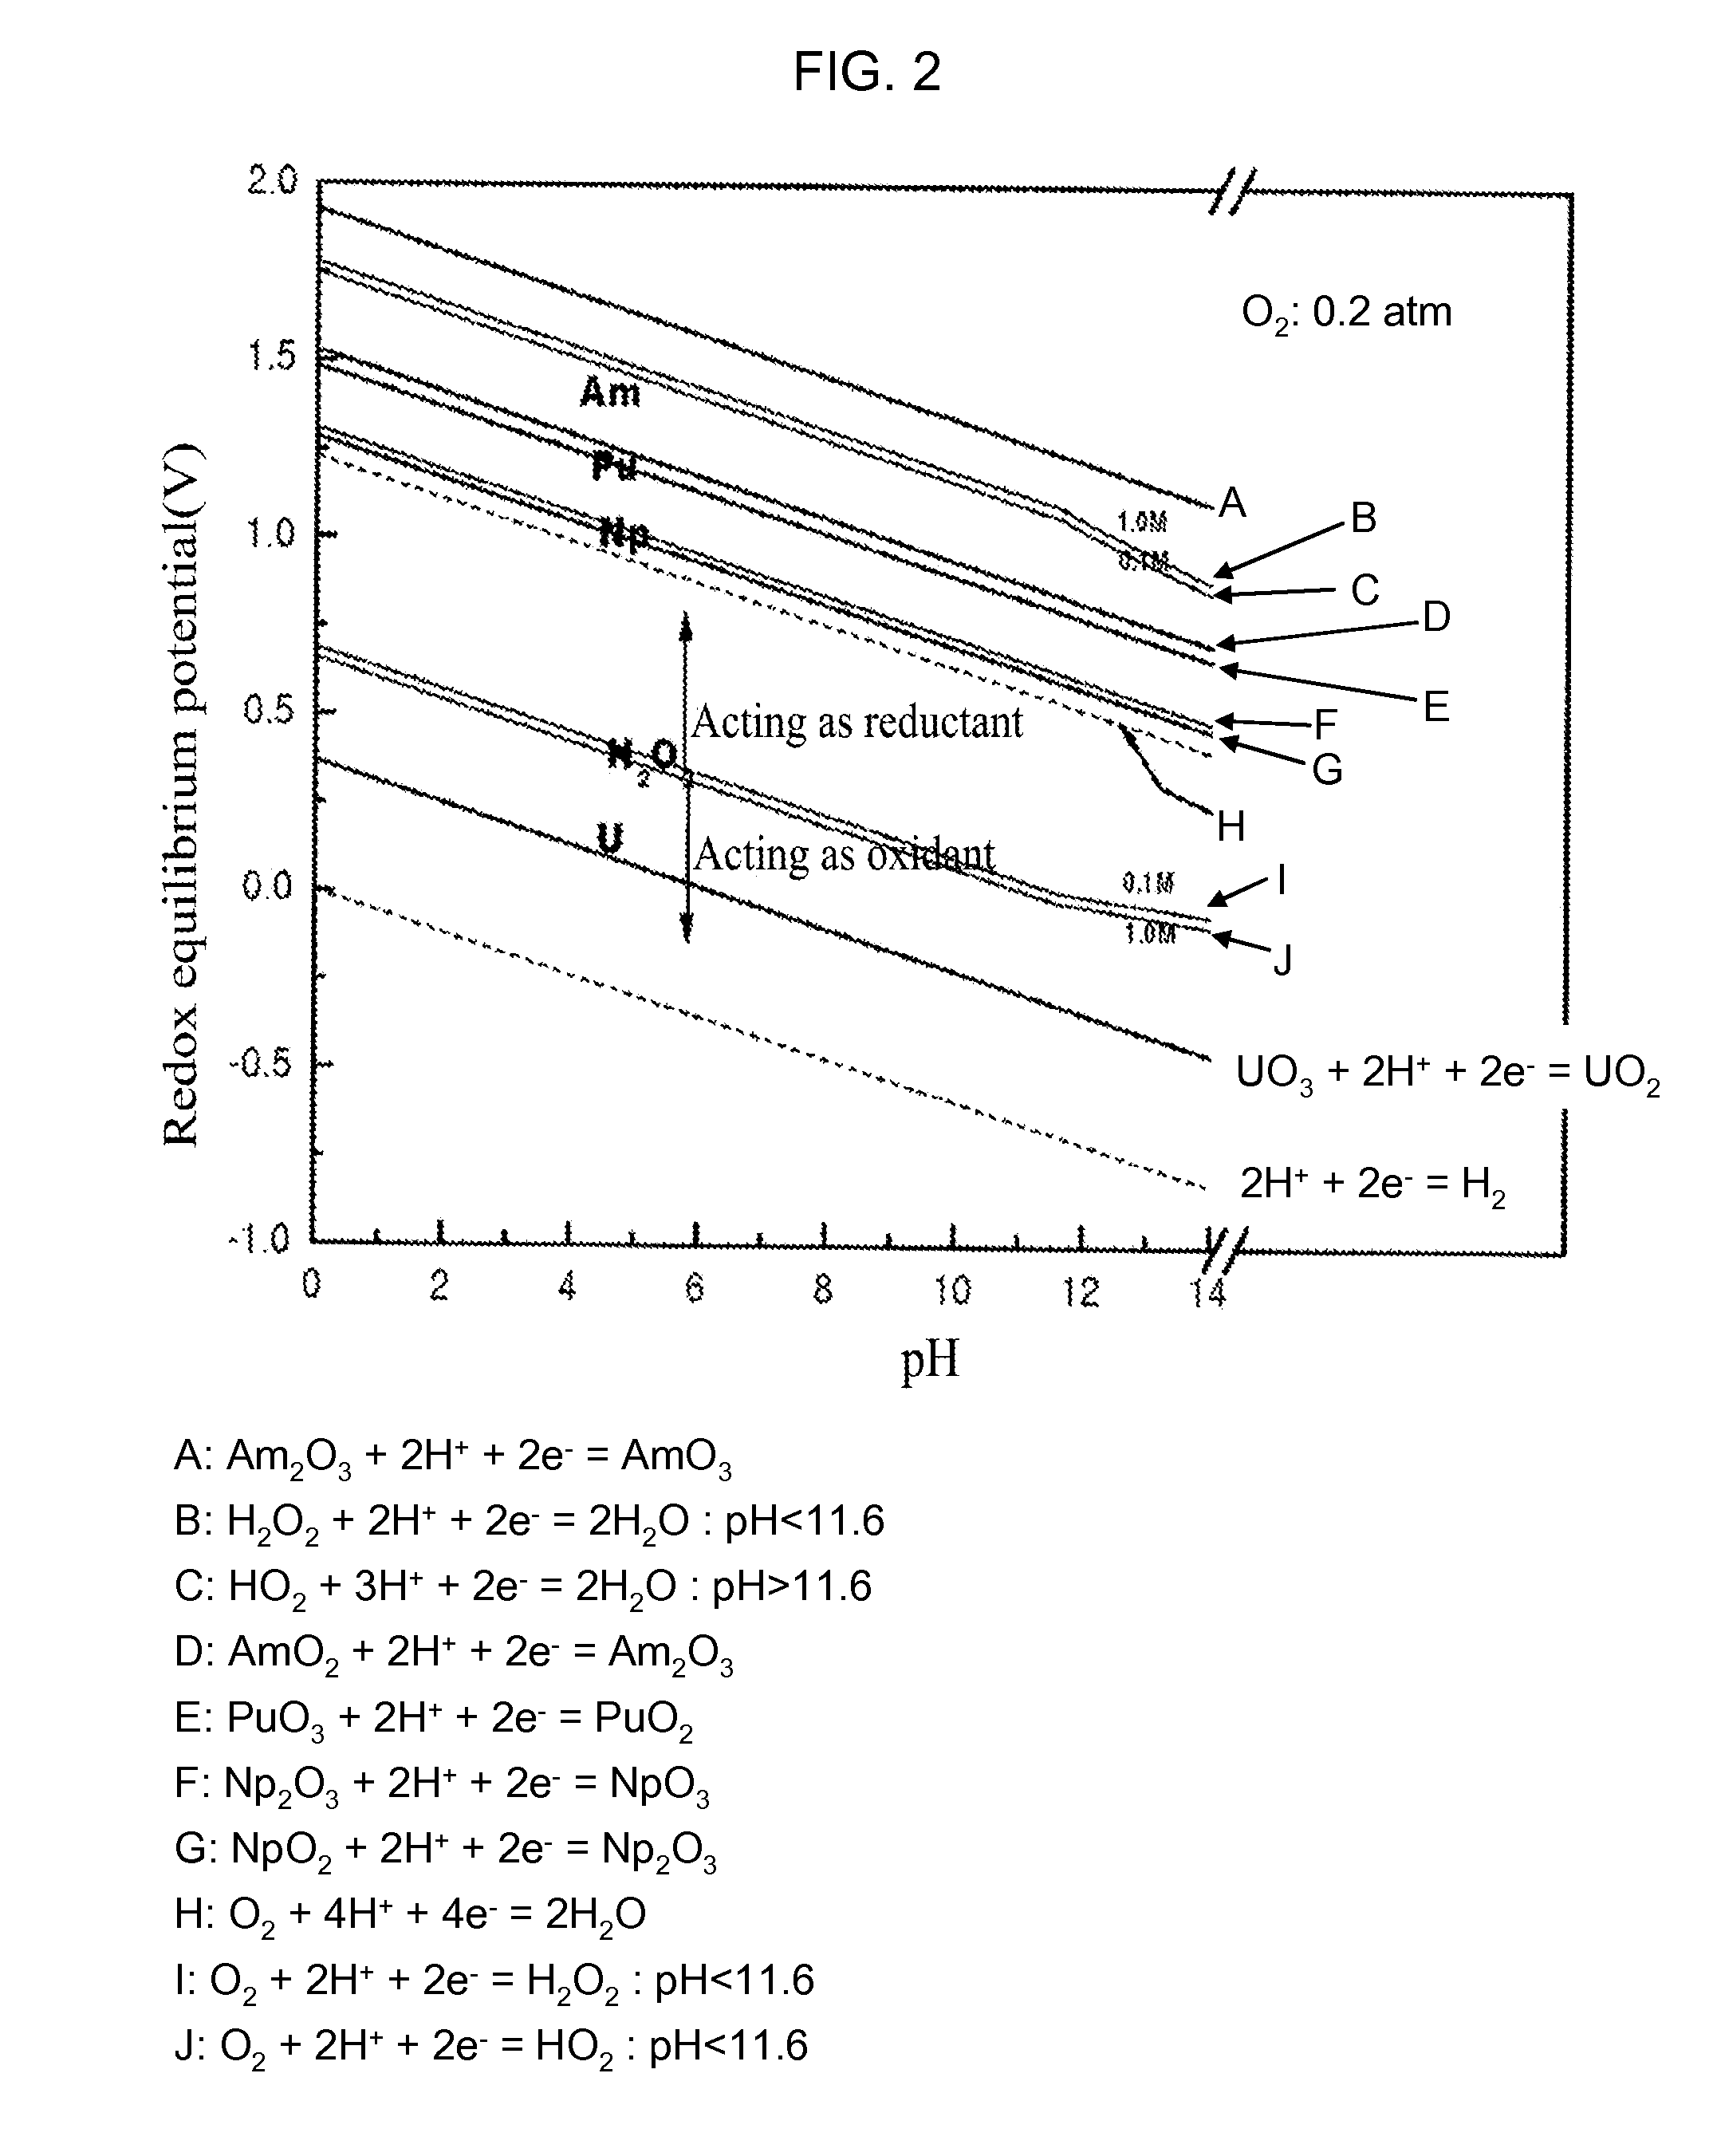 Process for Recovering Isolated Uranium From Spent Nuclear Fuel Using a Highly Alkaline Carbonate Solution